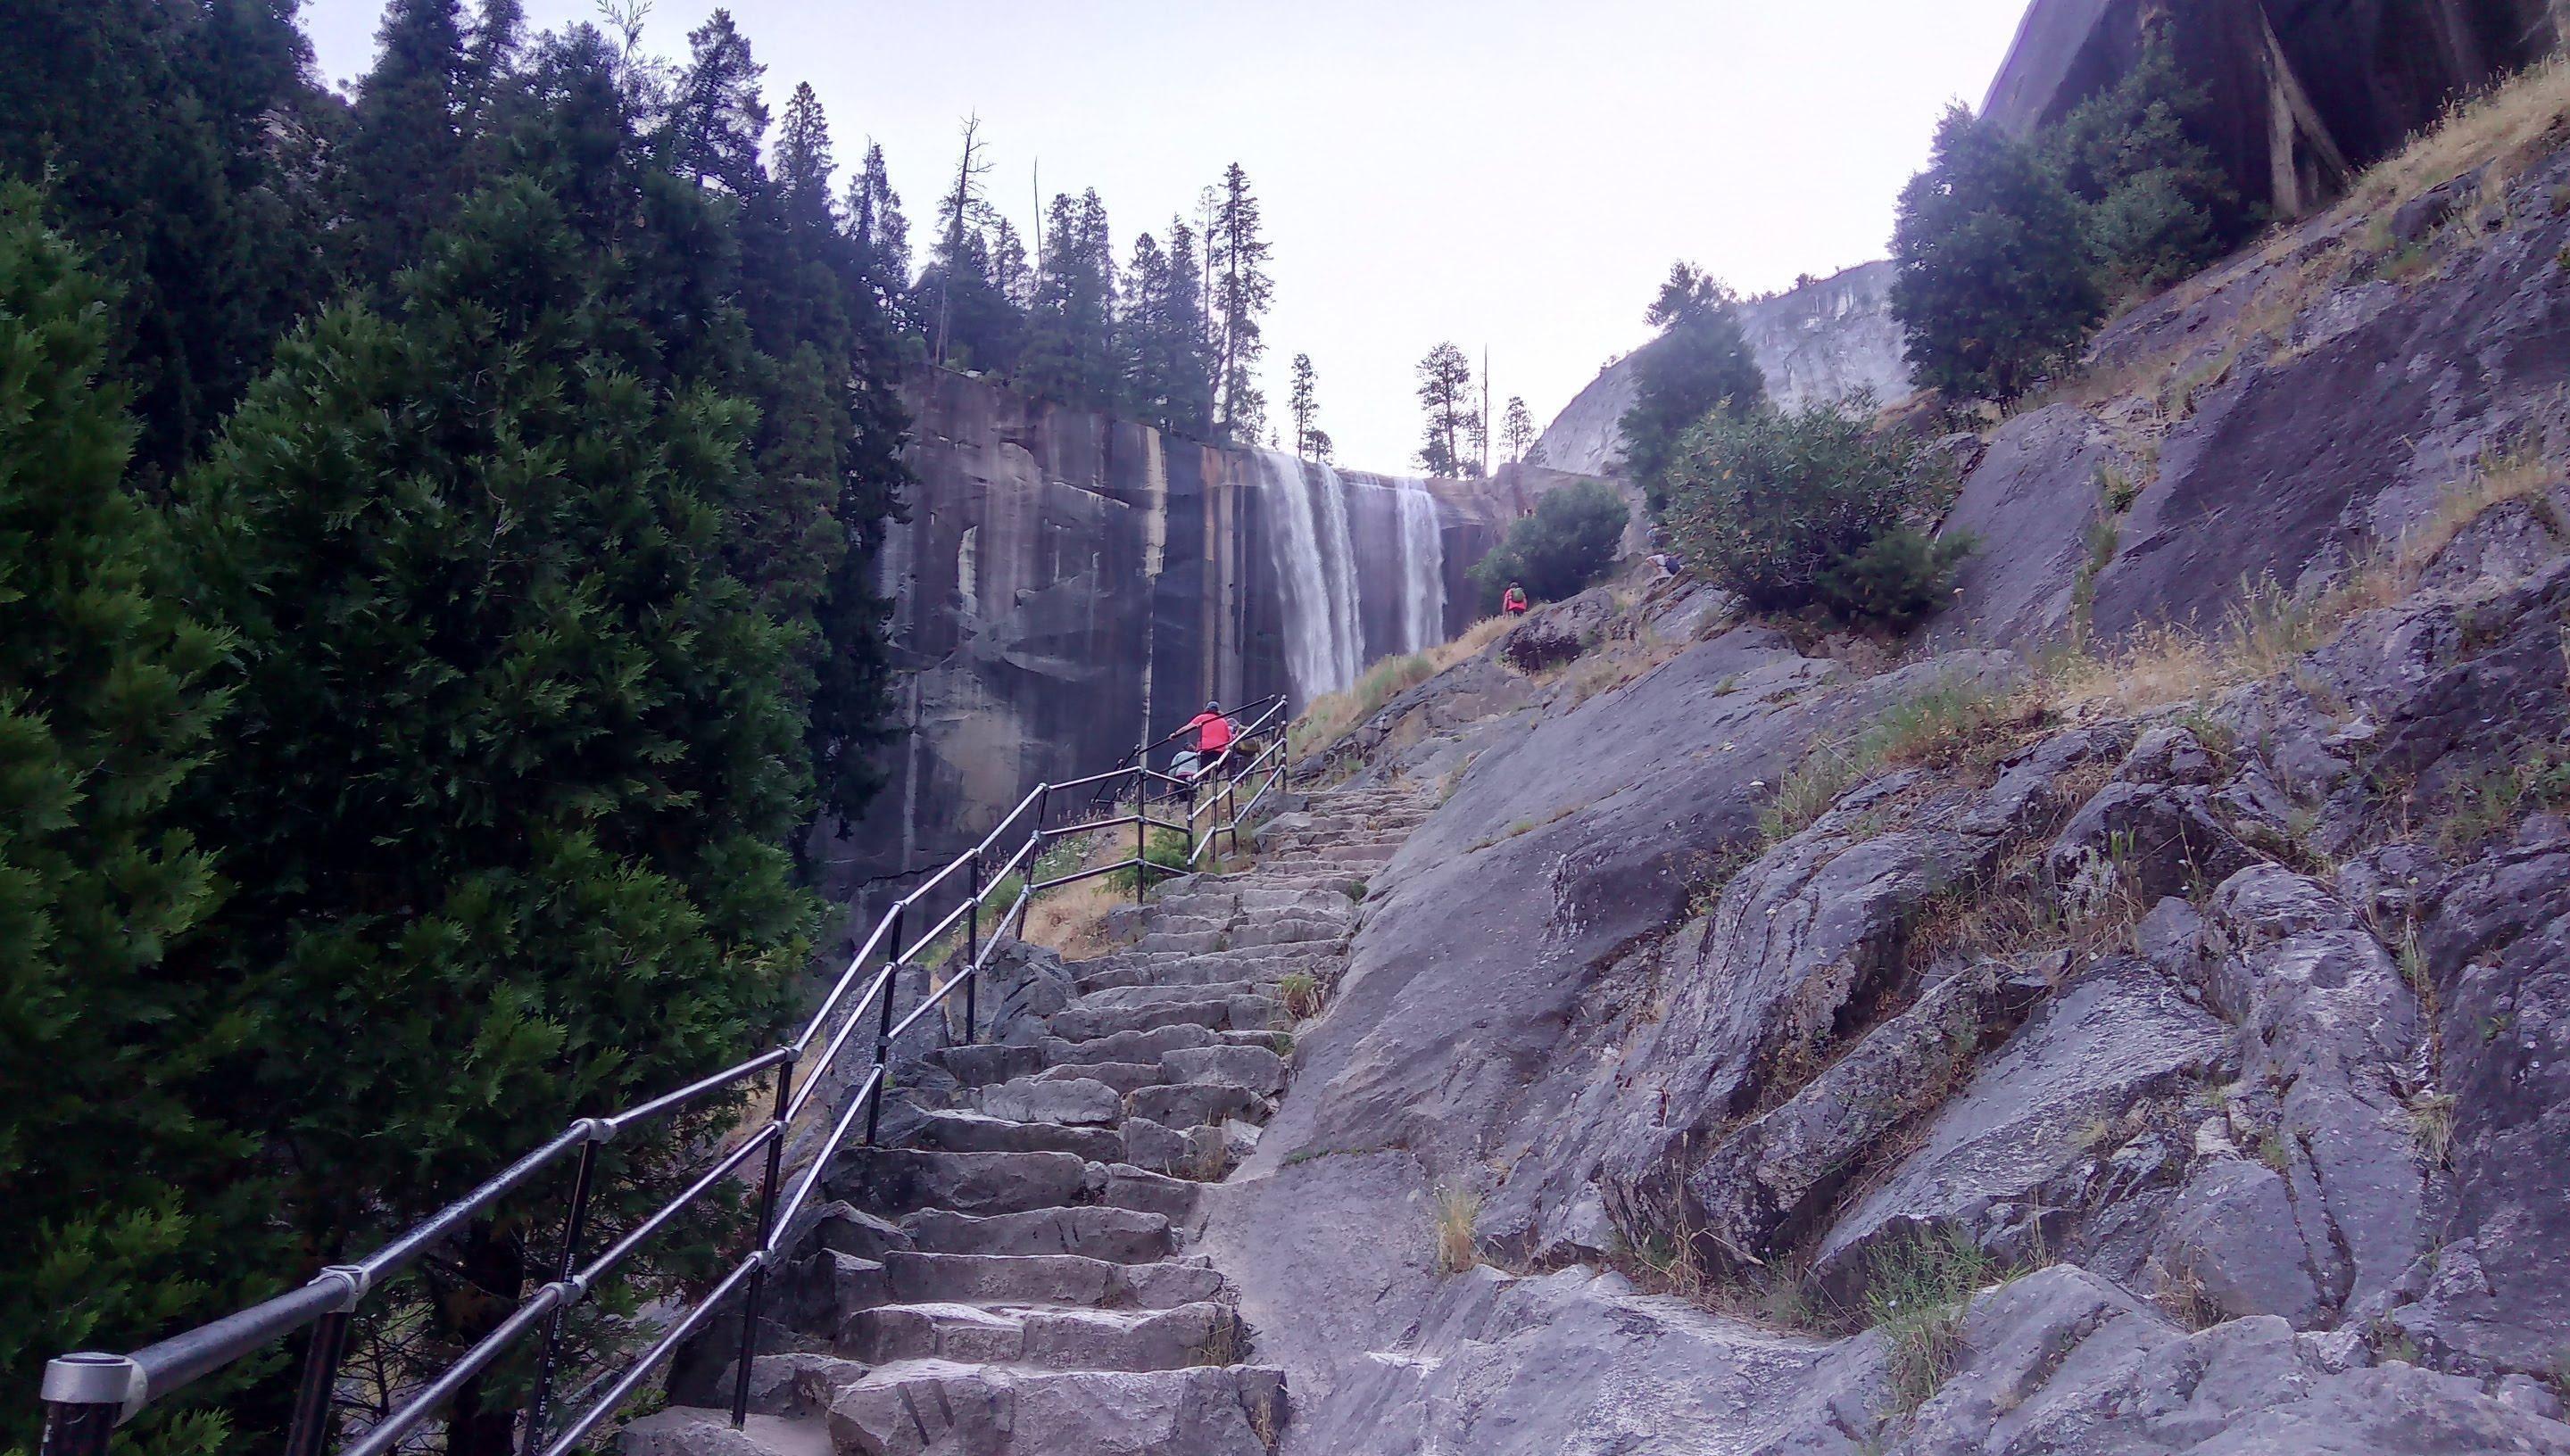 Vernal fall and steps on Mist trail